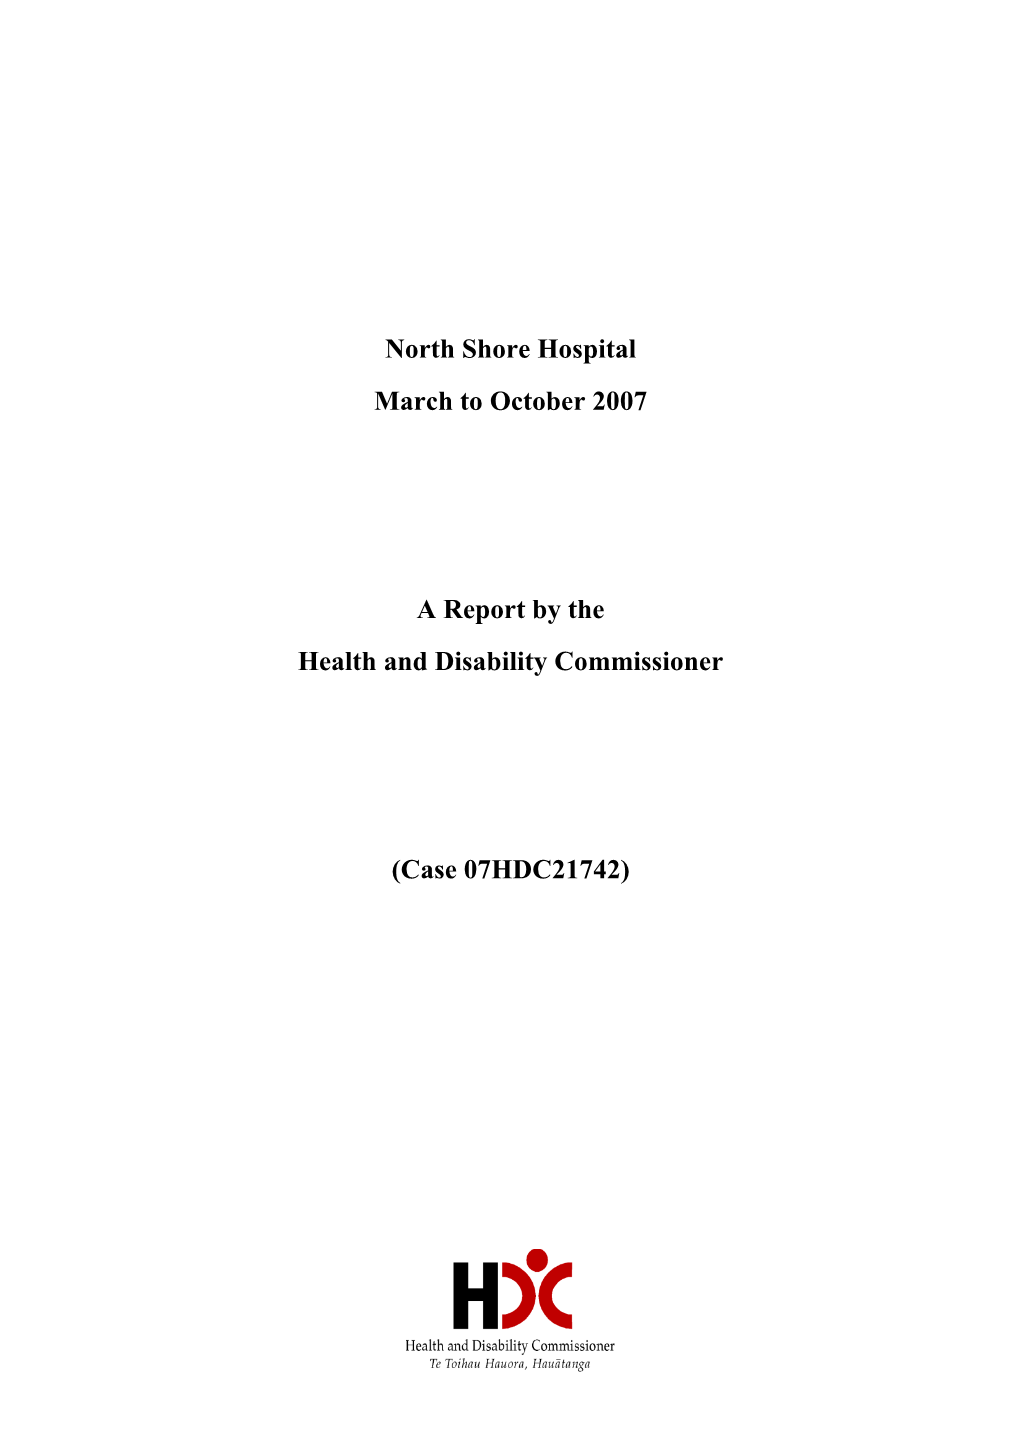 North Shore Hospital March to October 2007 a Report by the Health and Disability Commissioner (Case 07HDC21742)